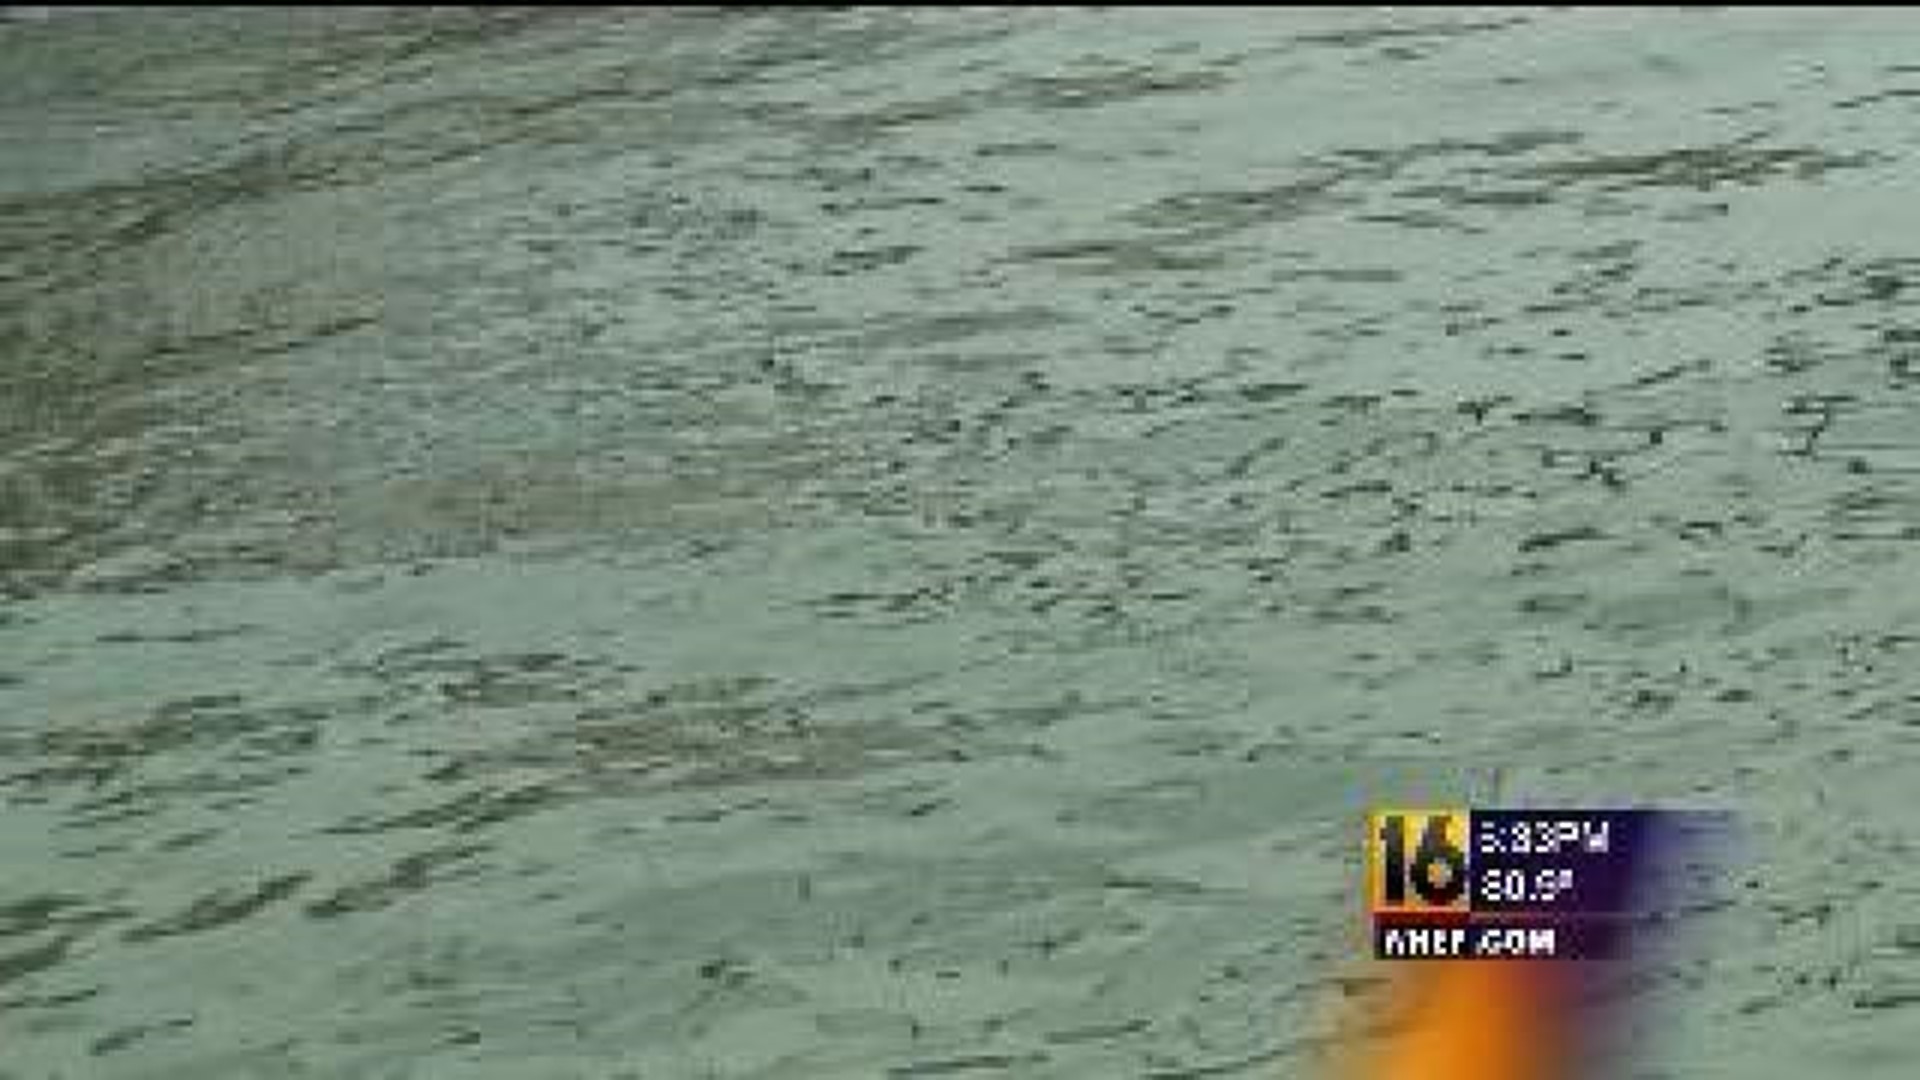 Woman Rescues Child From Nearly Drowning